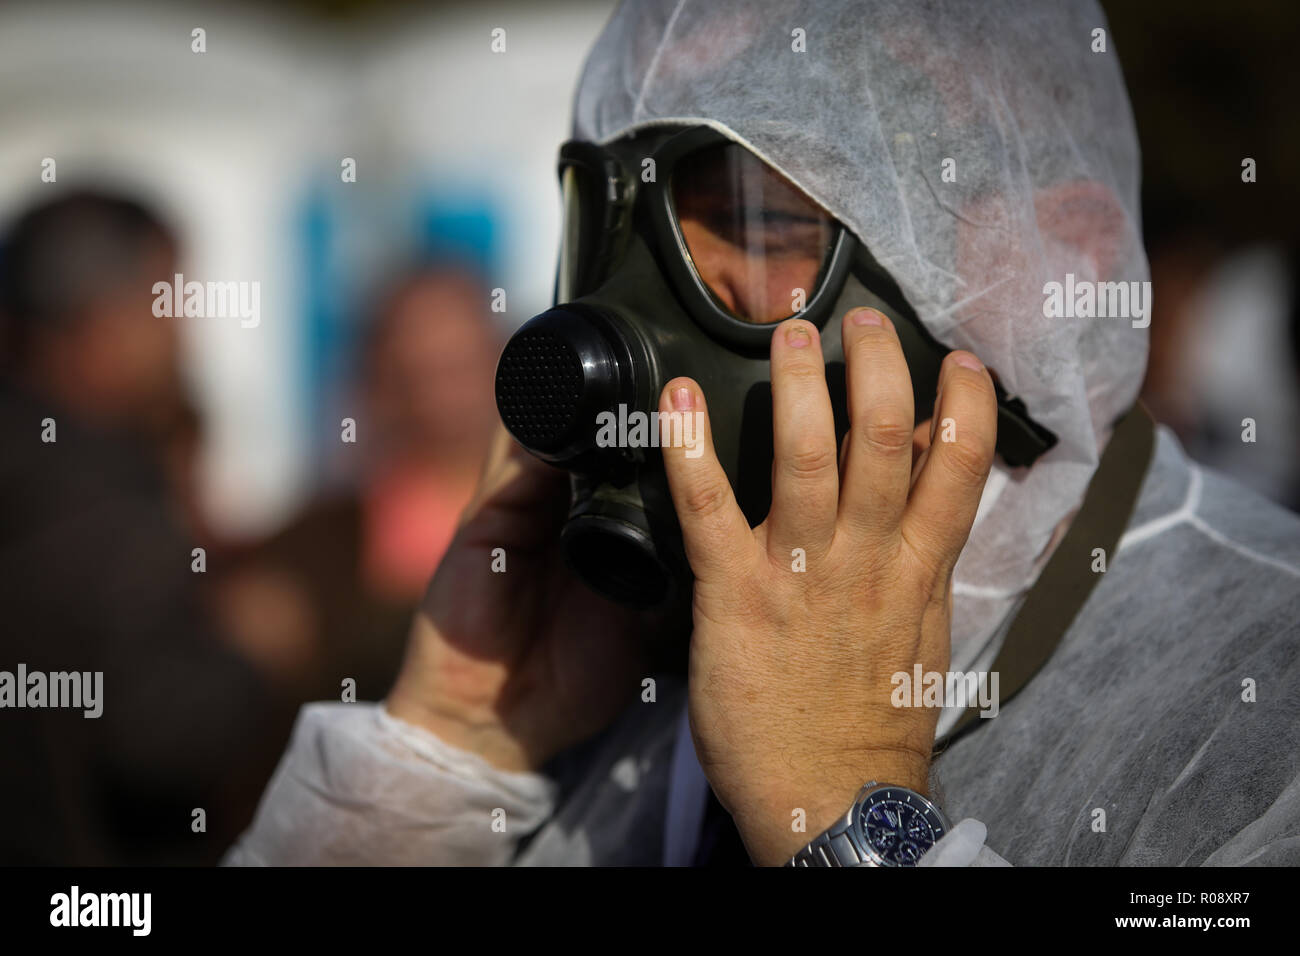 Vet doctor wearing a protective suit puts on a gas mask Stock Photo